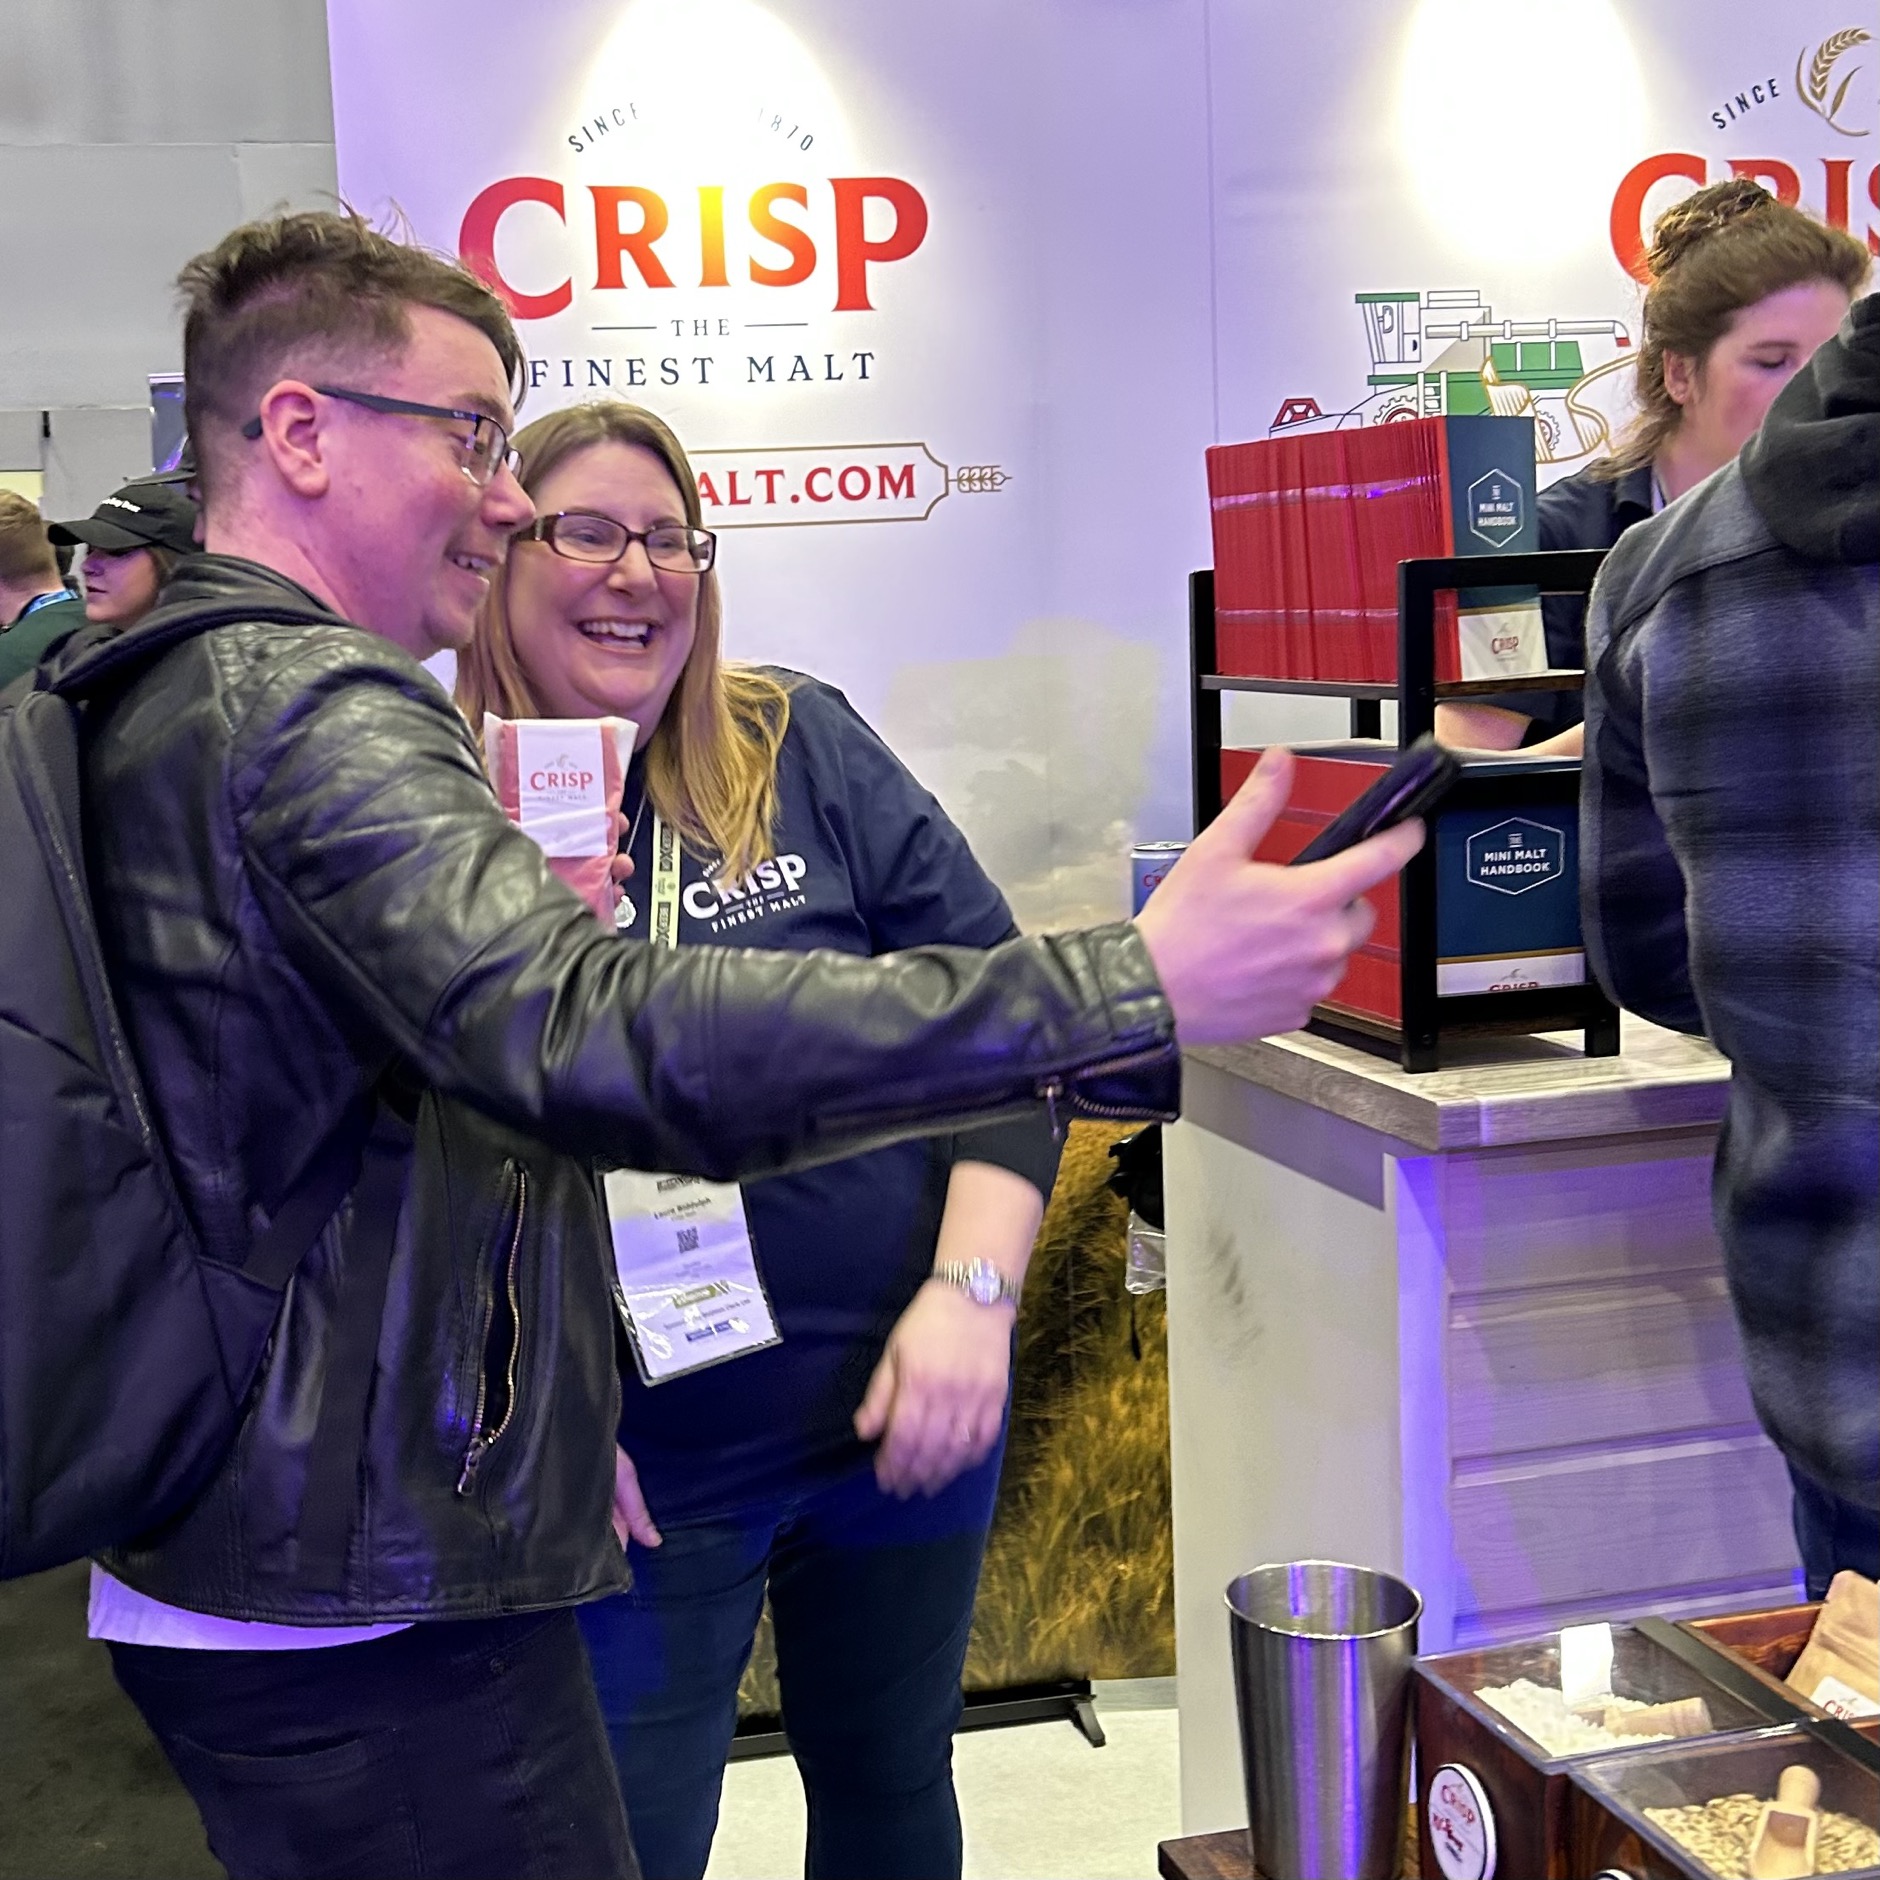 Laura Biddulph our Craft Sales Operations Administrator at Crisp Malt helps a customer on the BeerX stand